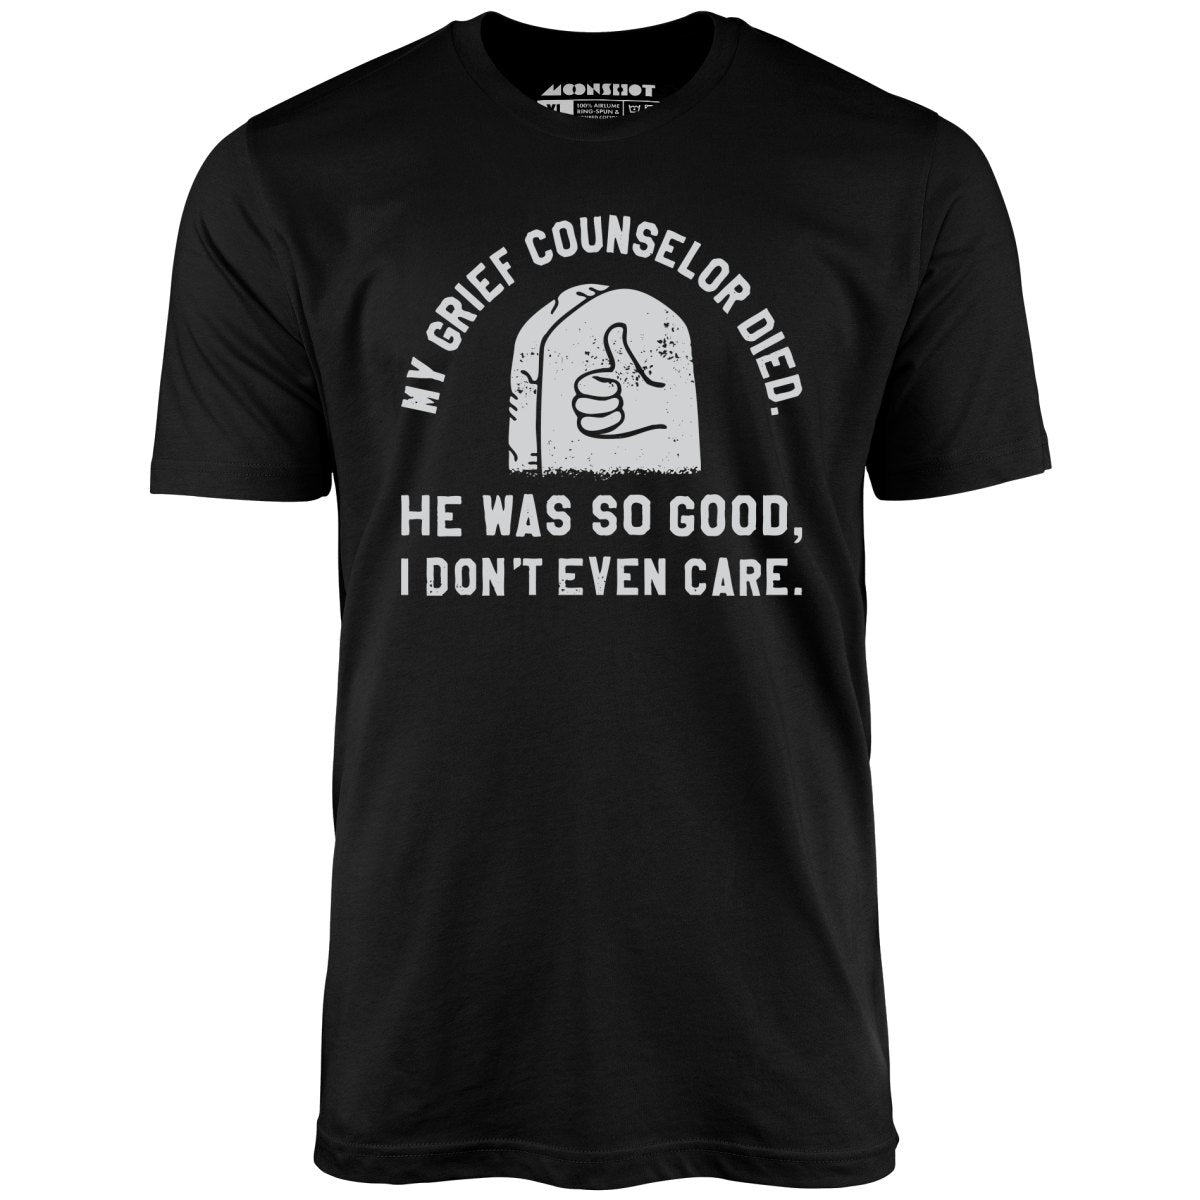 My Grief Counselor Died - Unisex T-Shirt